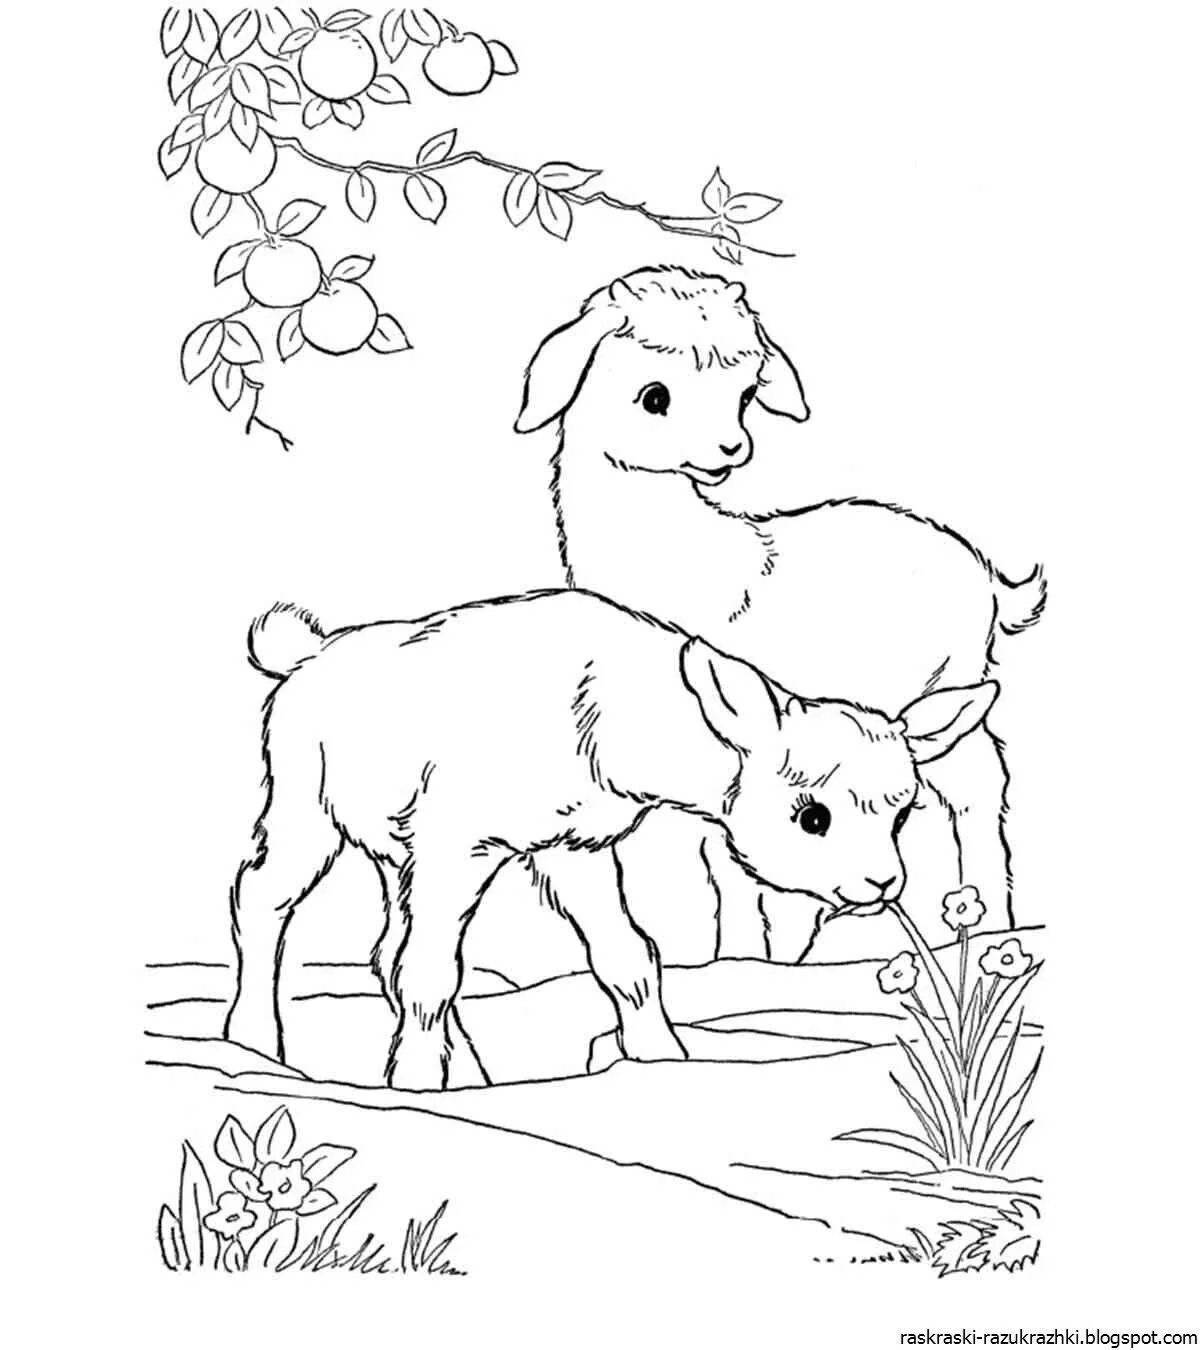 Playful coloring book pets for children 5-7 years old